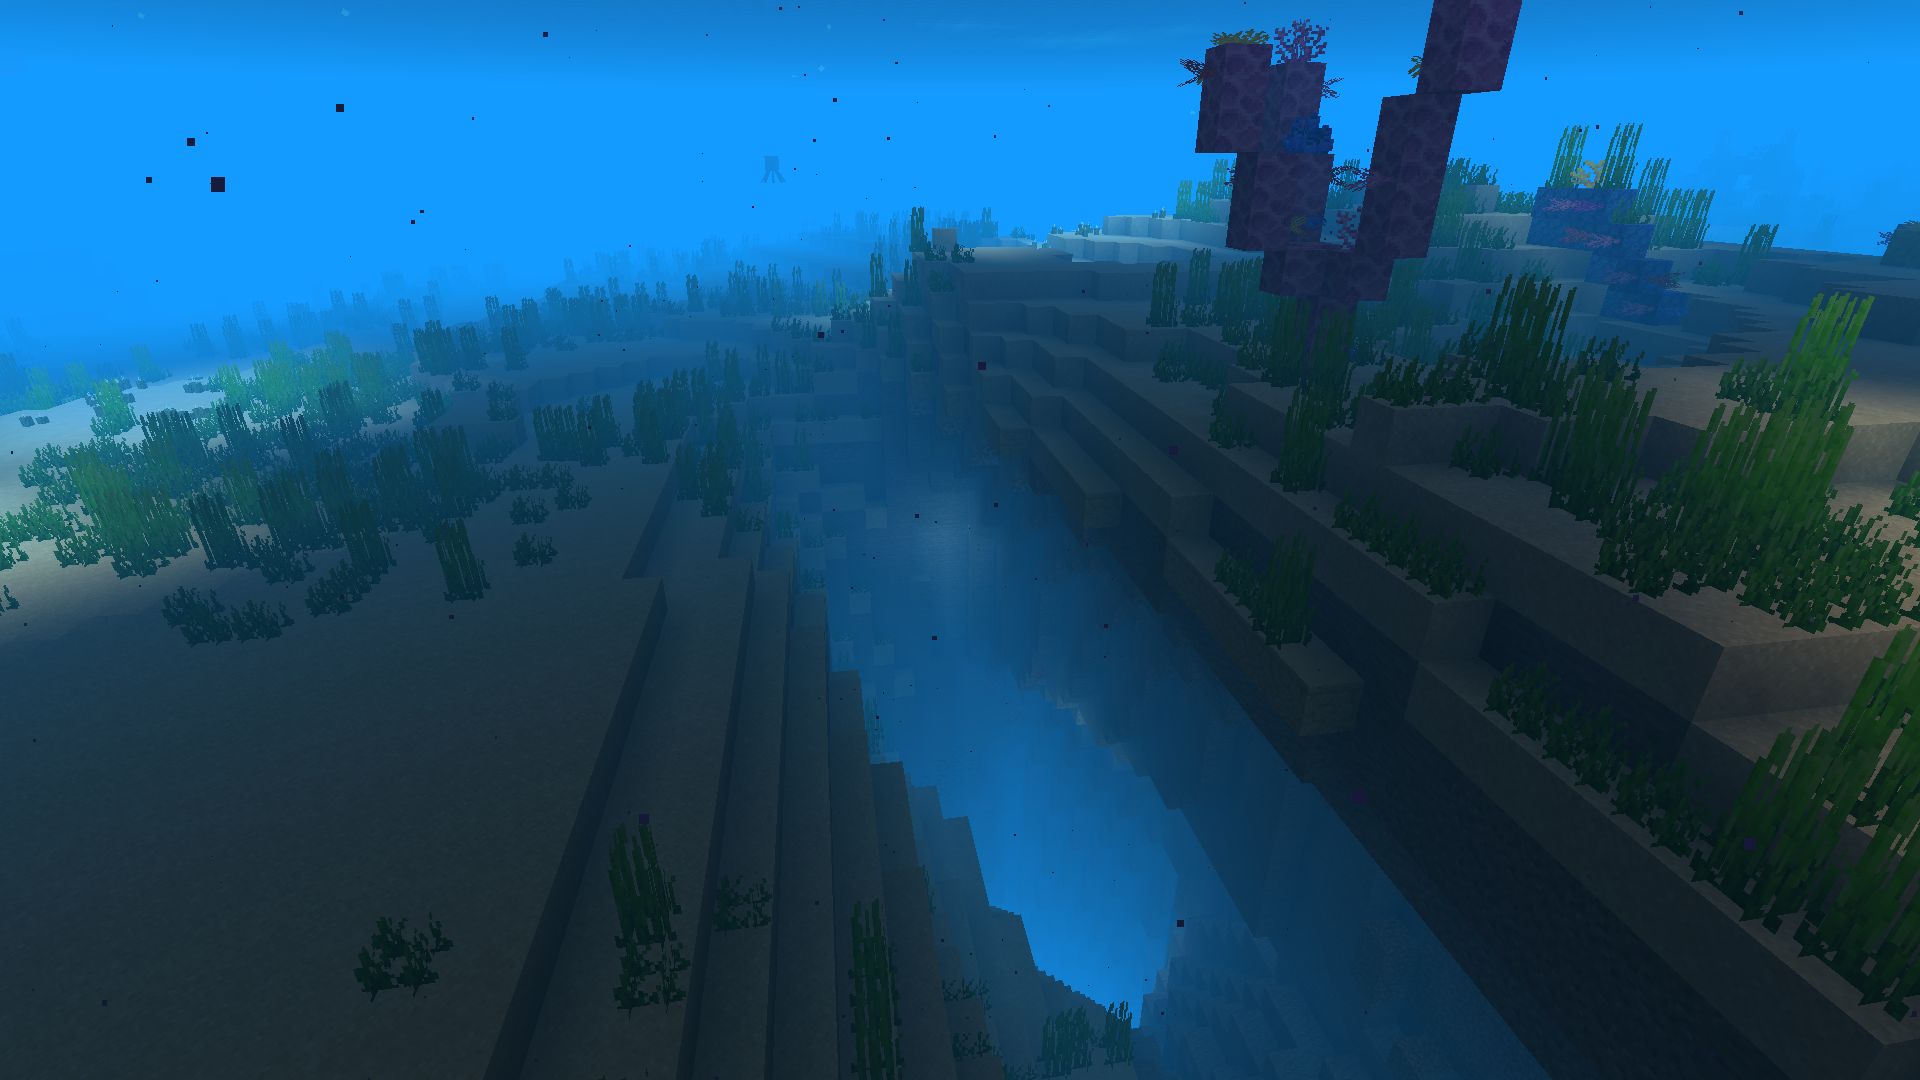 Add a touch of nature to your desktop with our HD desktop wallpaper featuring Minecraft, ocean, cave, underwater, and coral themes. Each image showcases the unique beauty of the natural world and will transport you to a place of serenity and calm. Upgrade your desktop today, and download our image now!